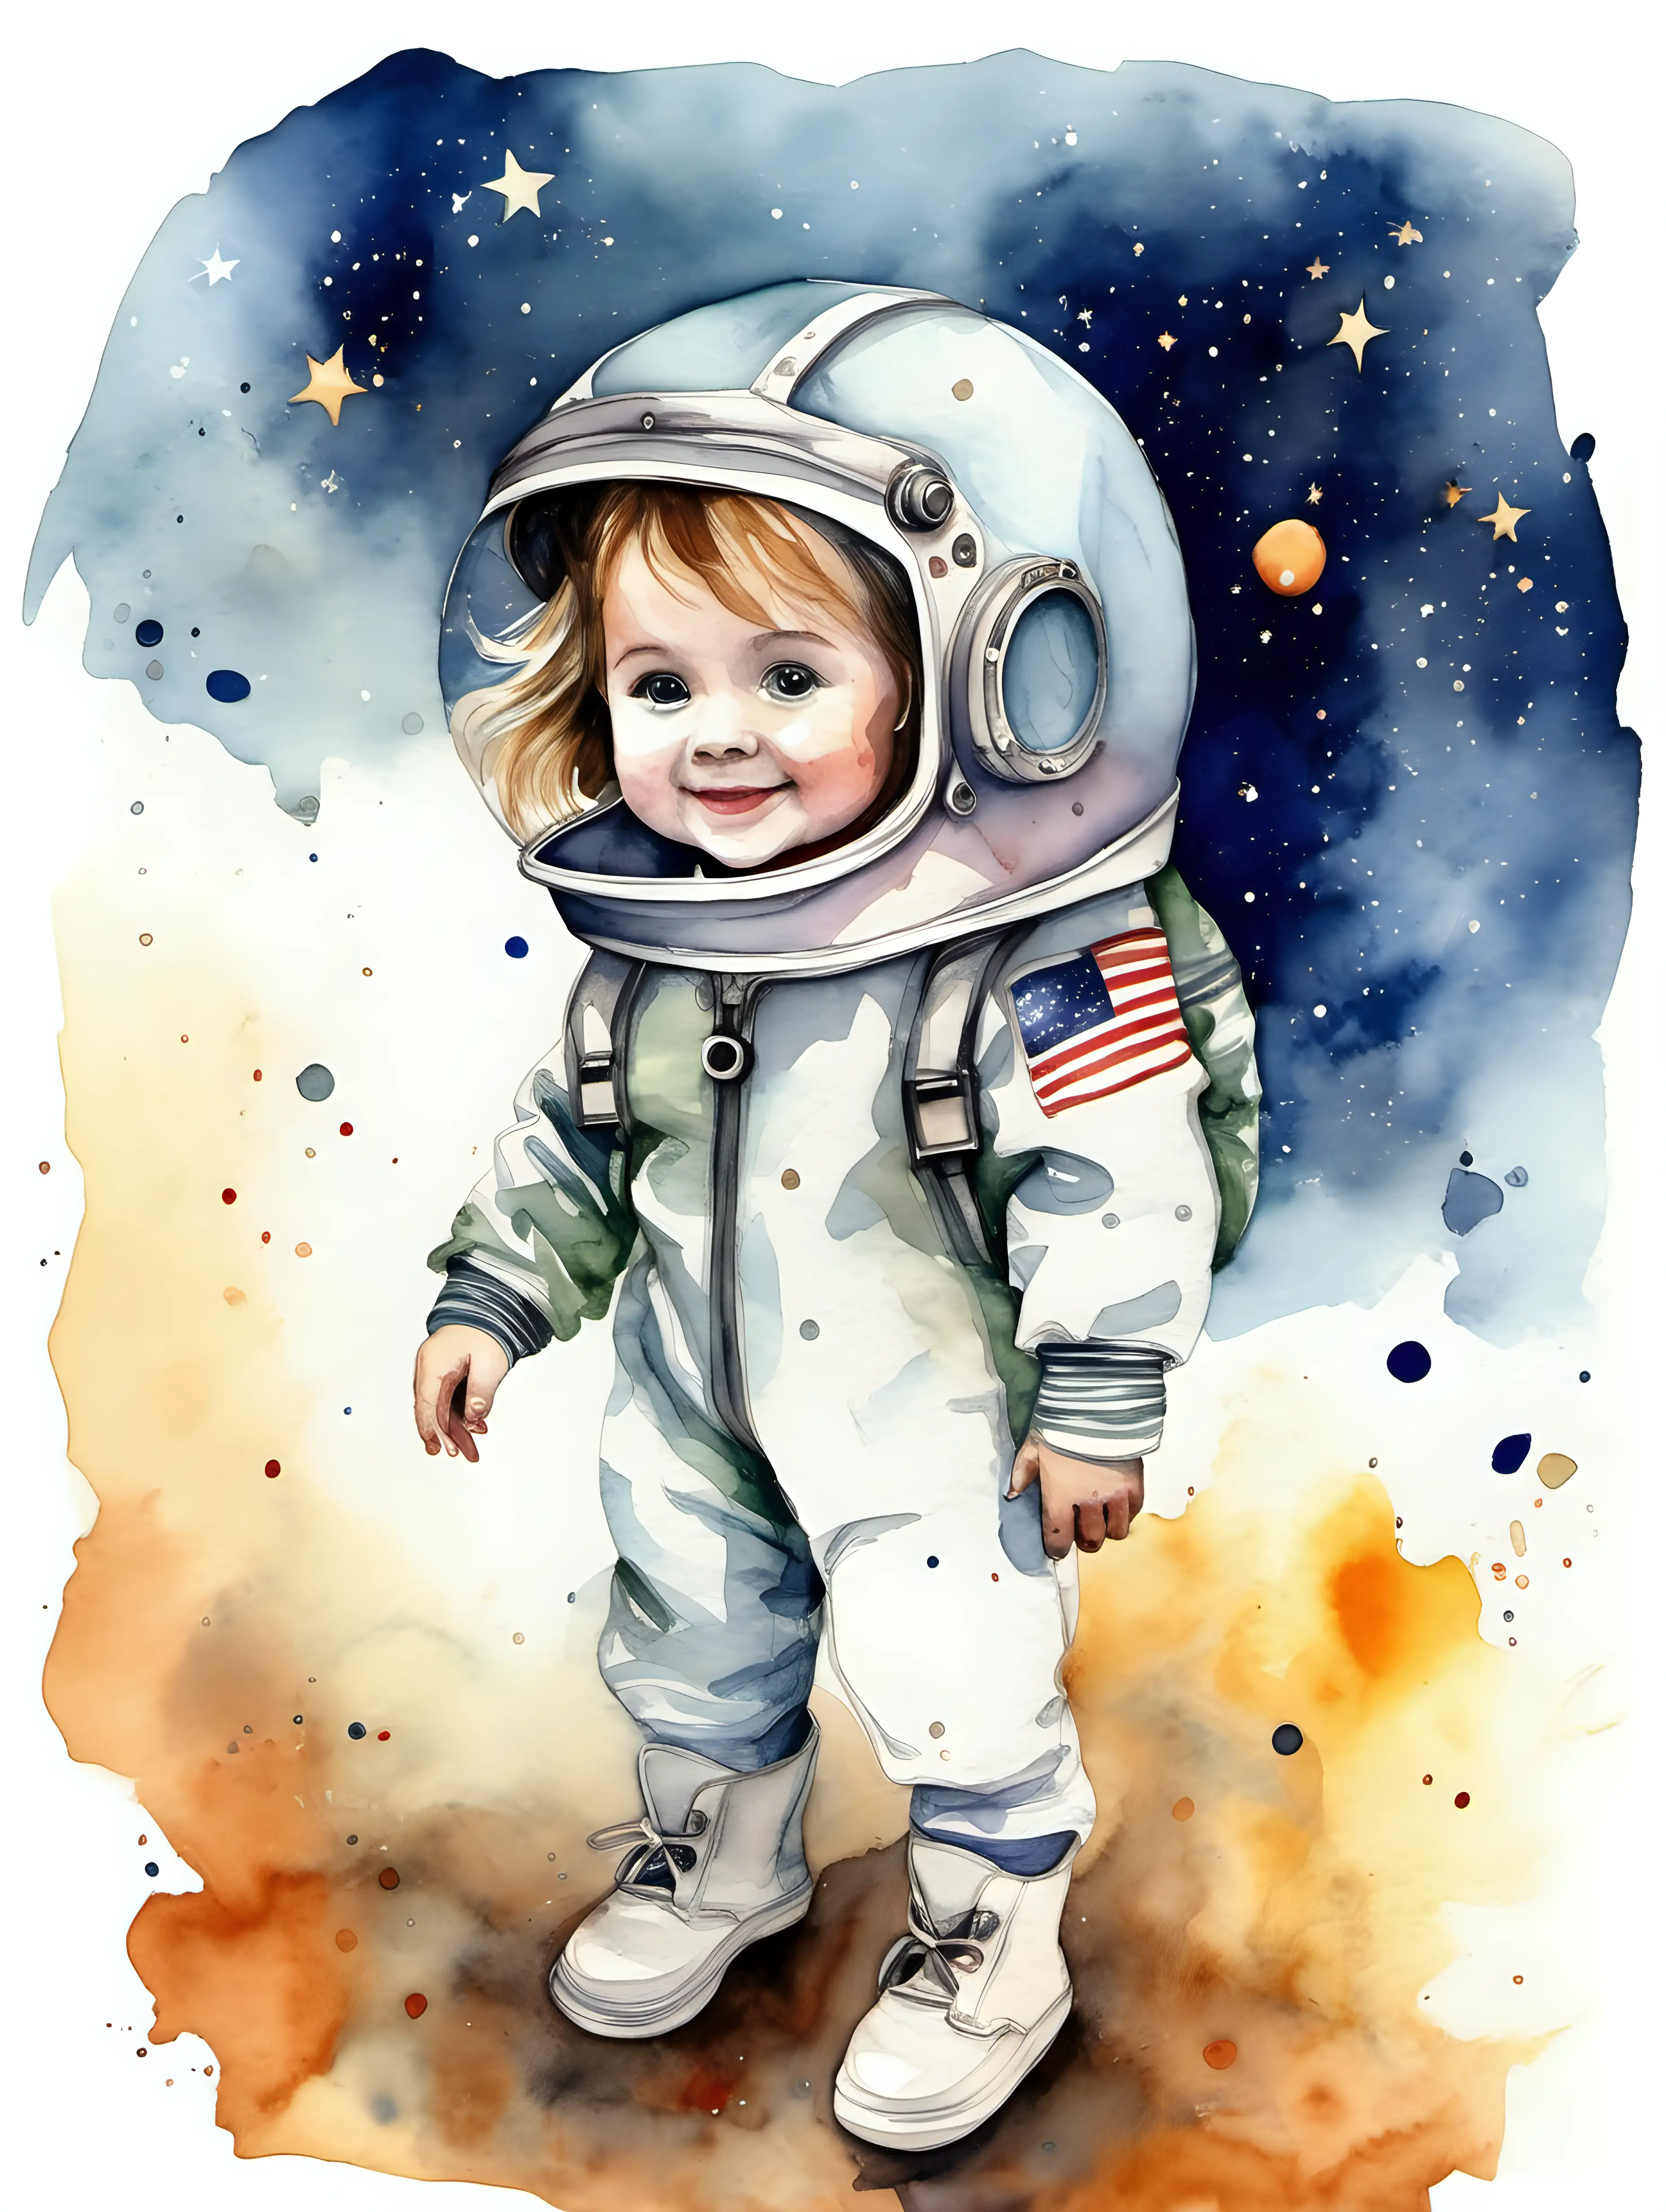 Charming Young Astronaut Girl with Watercolor Palette and Helmet